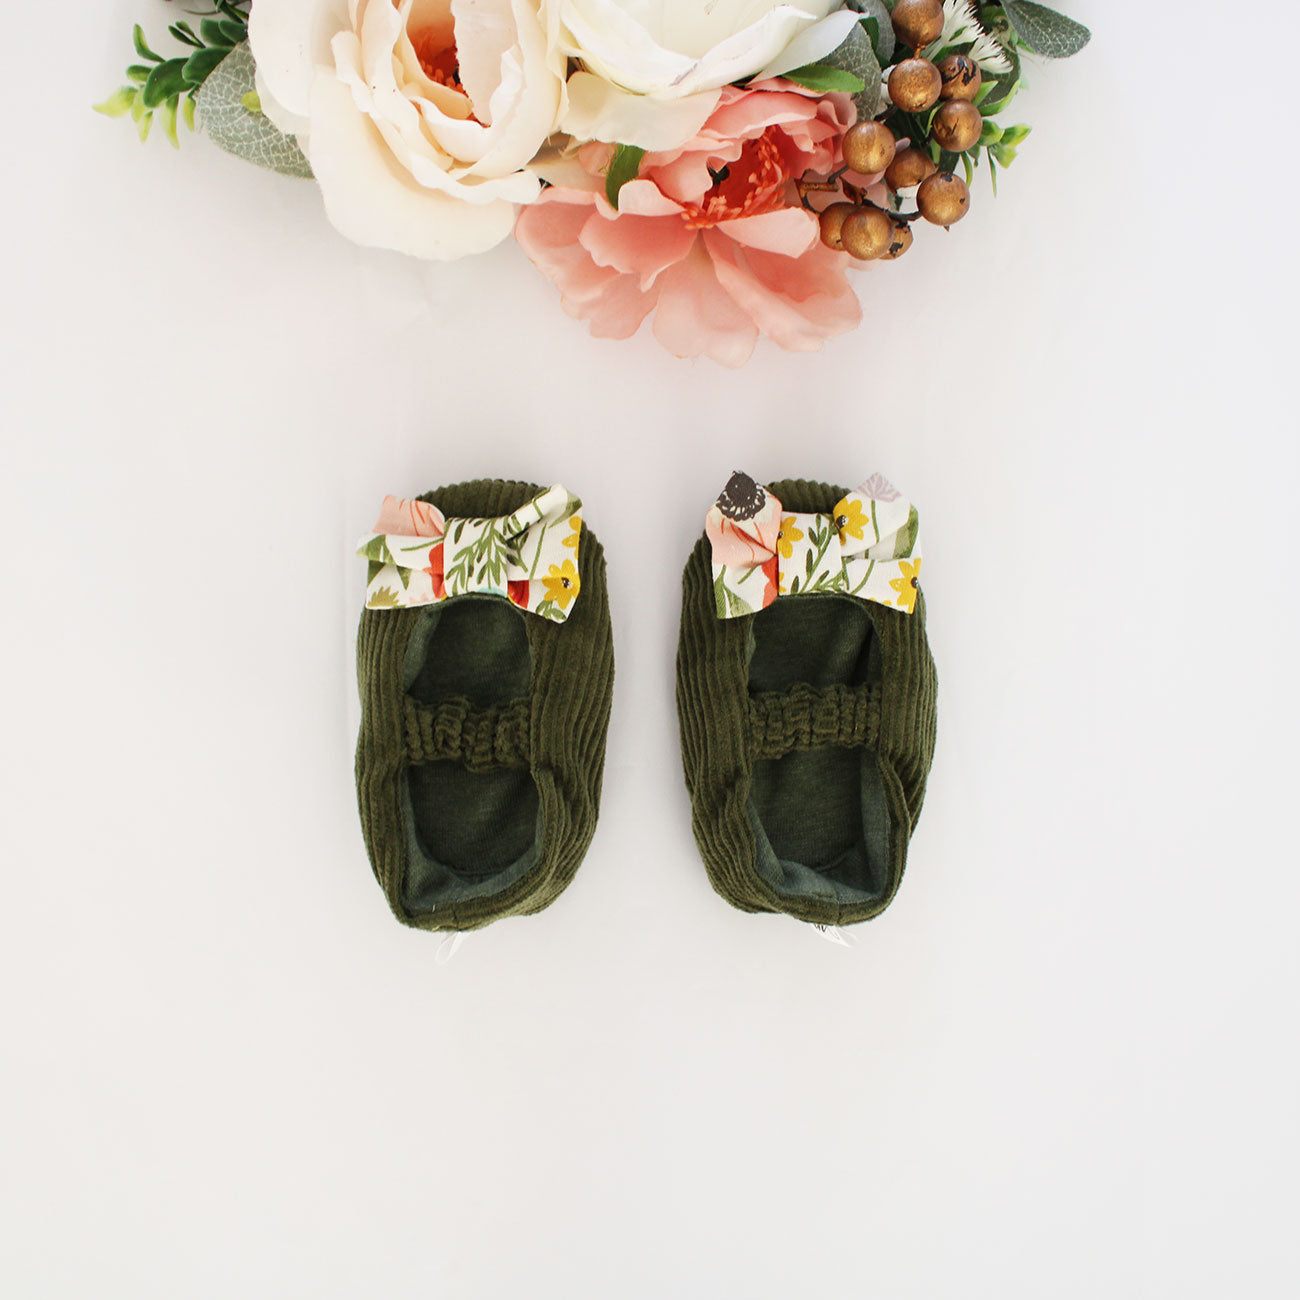 Soft Sole Shoes with bow - Basil Green Corduroy/Poppies Bow